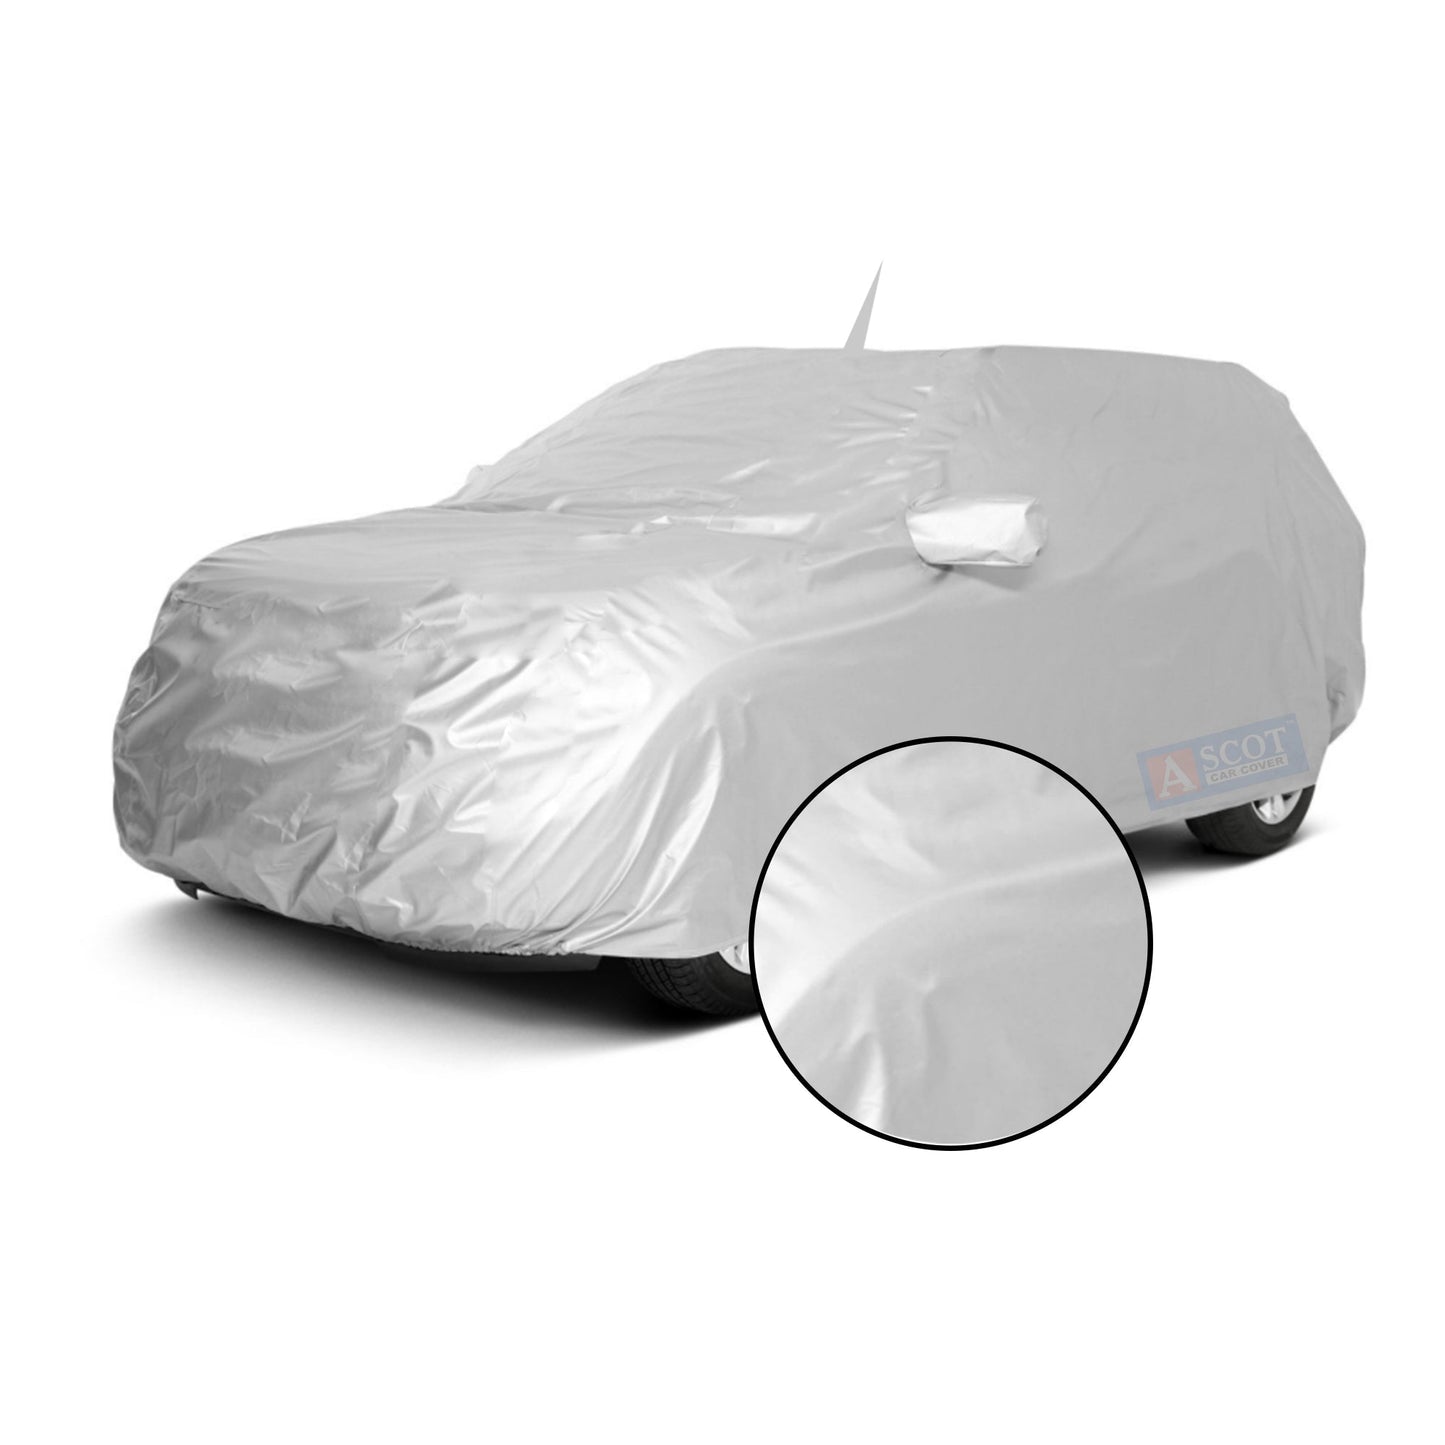 Ascot Mercedes-Benz S-Class Limousine 2006-2013 Model Car Body Cover Dust Proof, Trippel Stitched